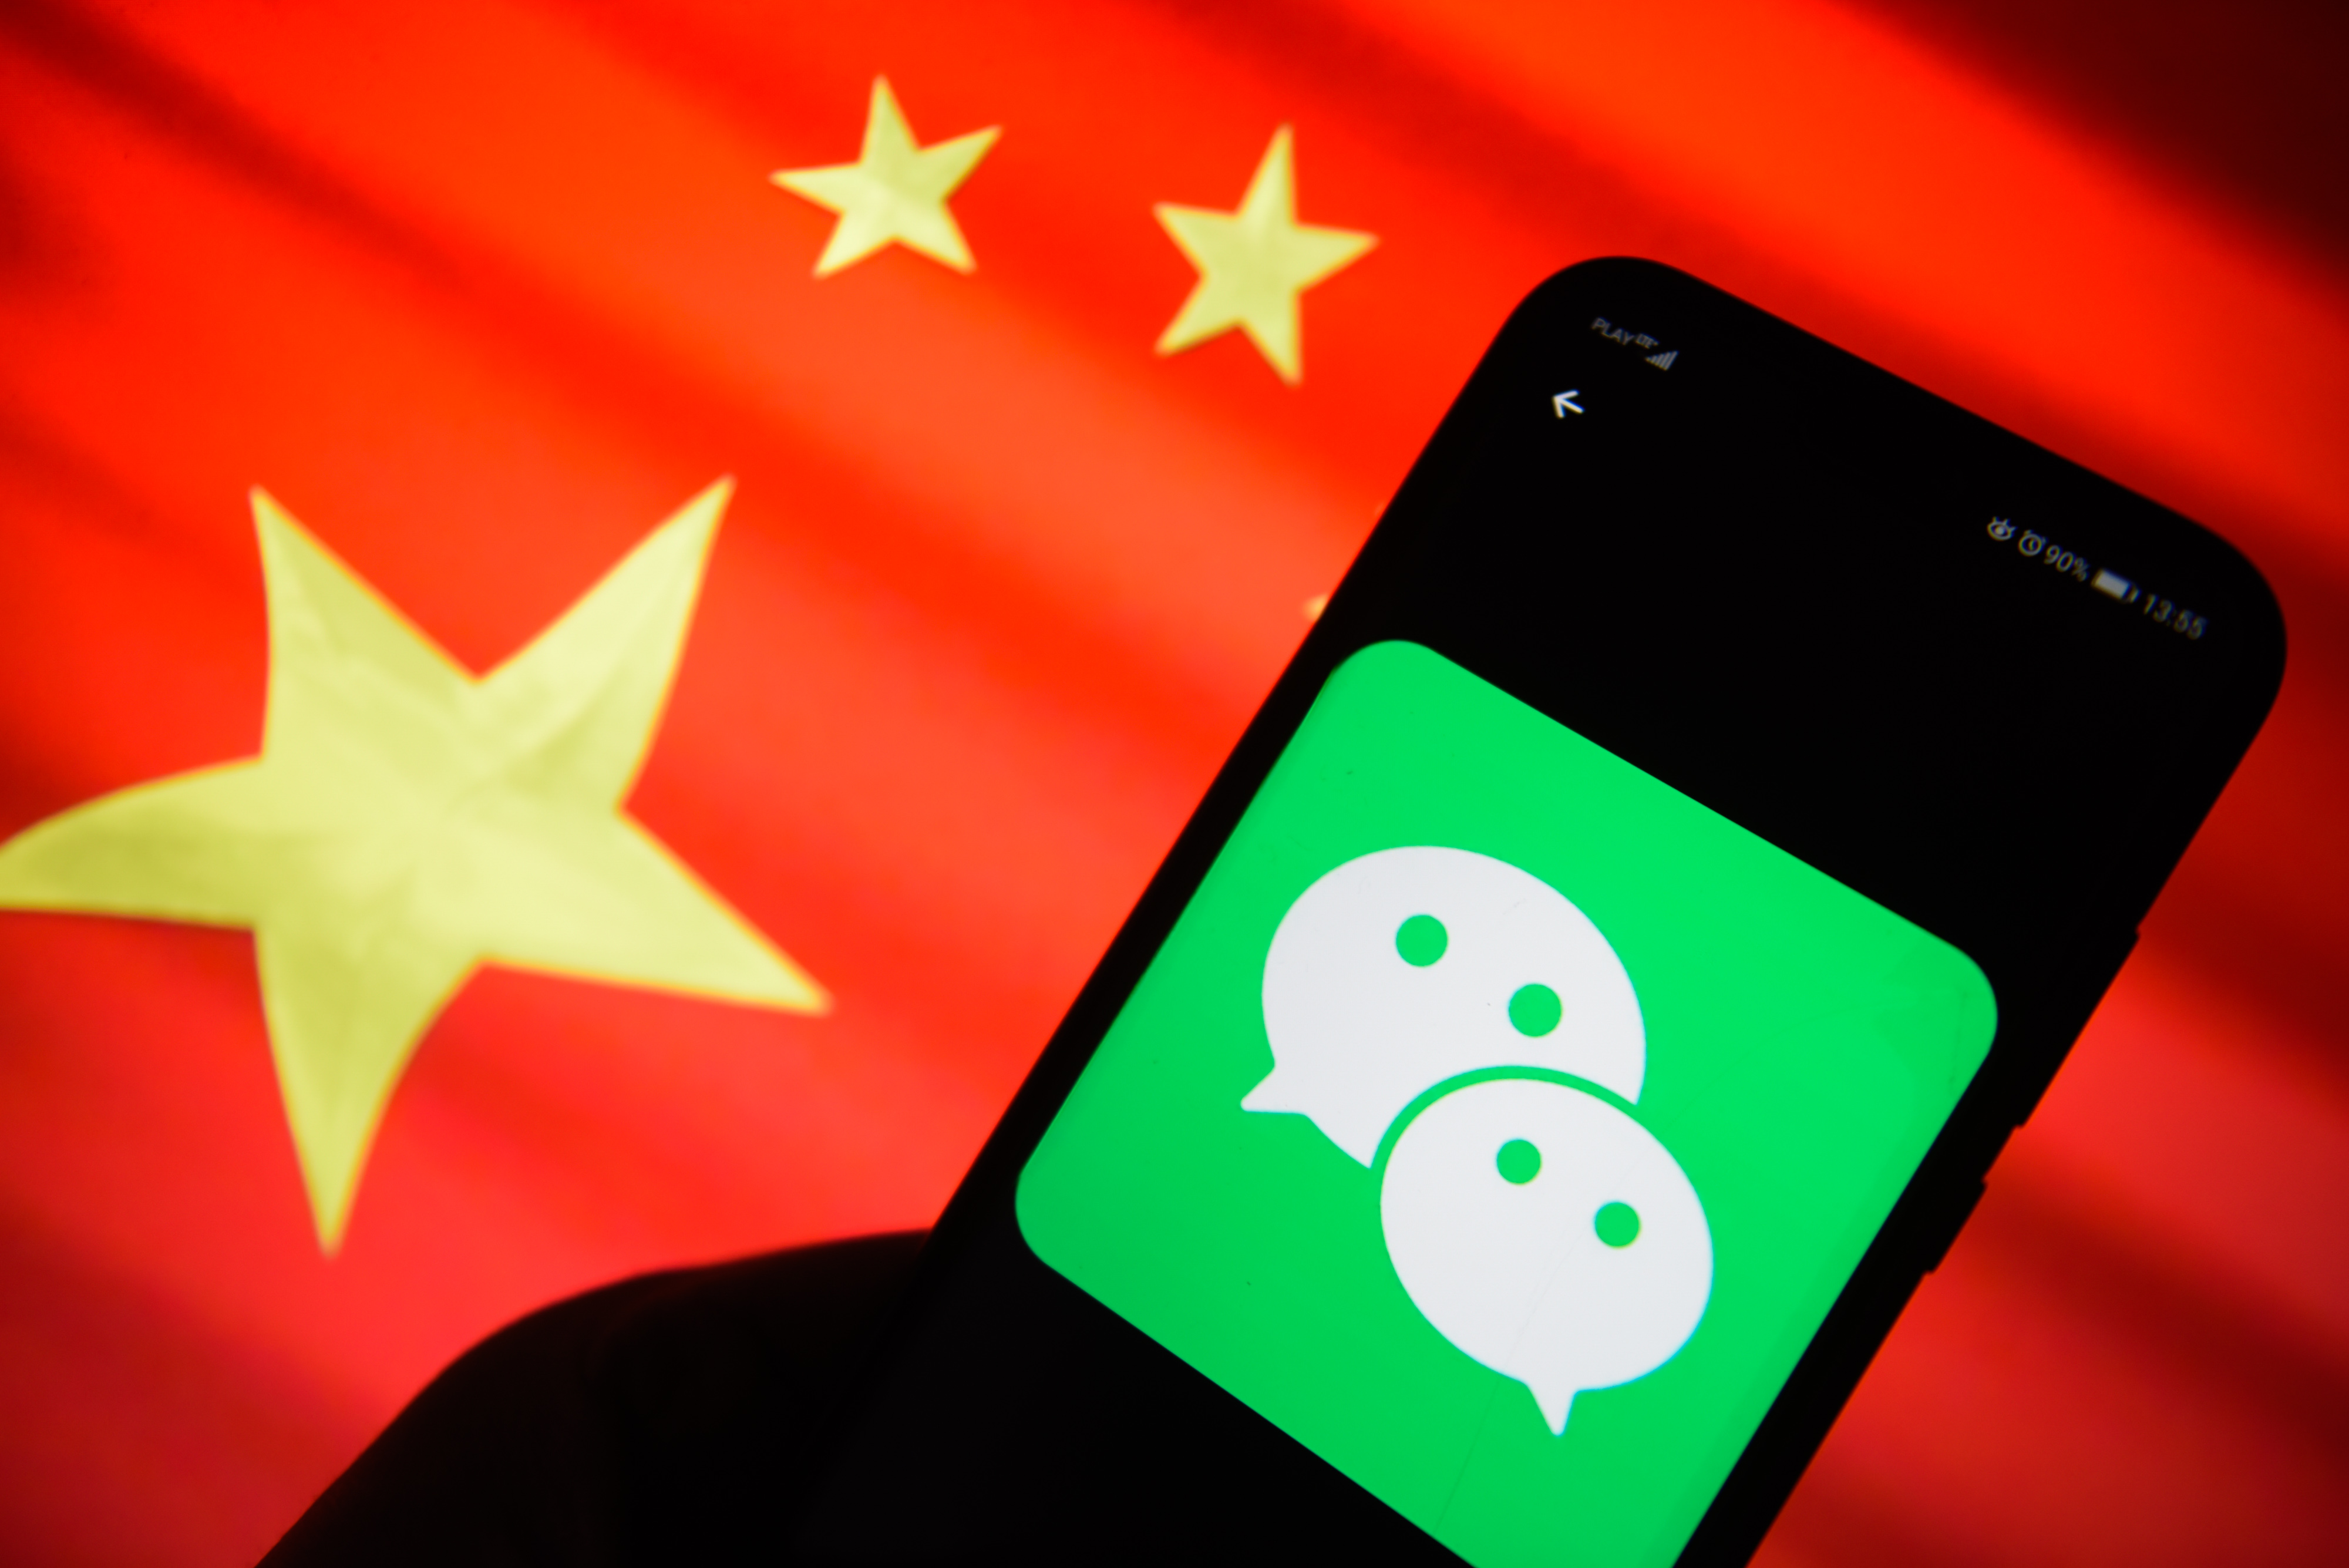 The WeChat logo is seen on a mobile phone with China's flag in the background. (Omar Marques—SOPA Images/LightRocket/Getty Images)